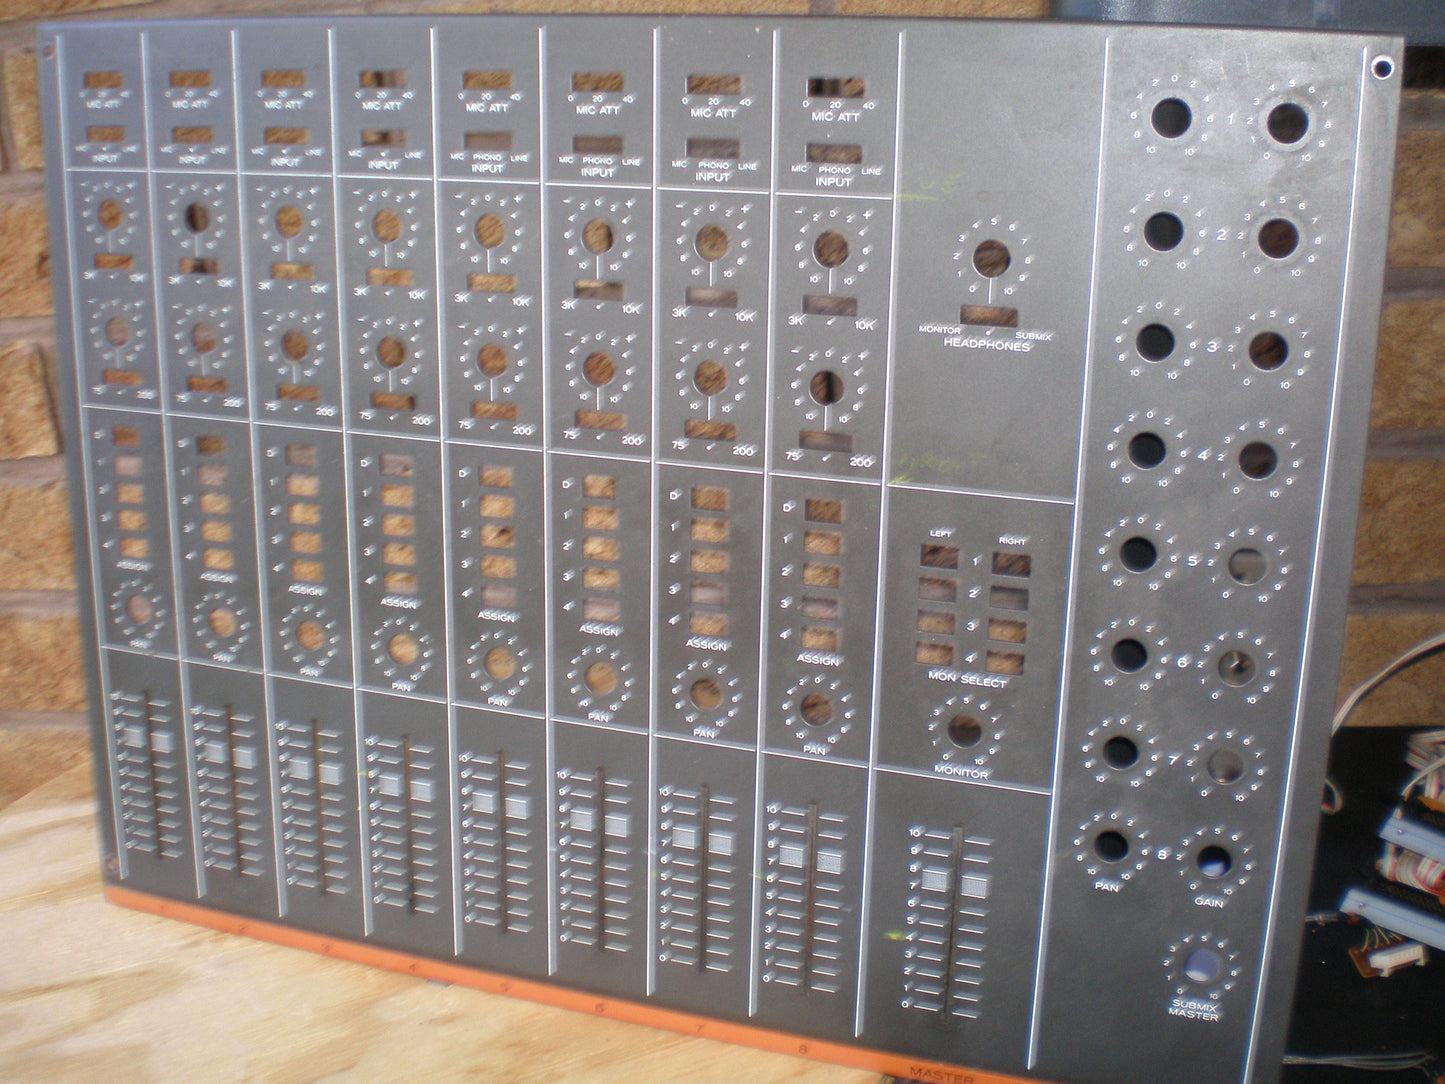 Teac 3 Tascam series Mixer front panel